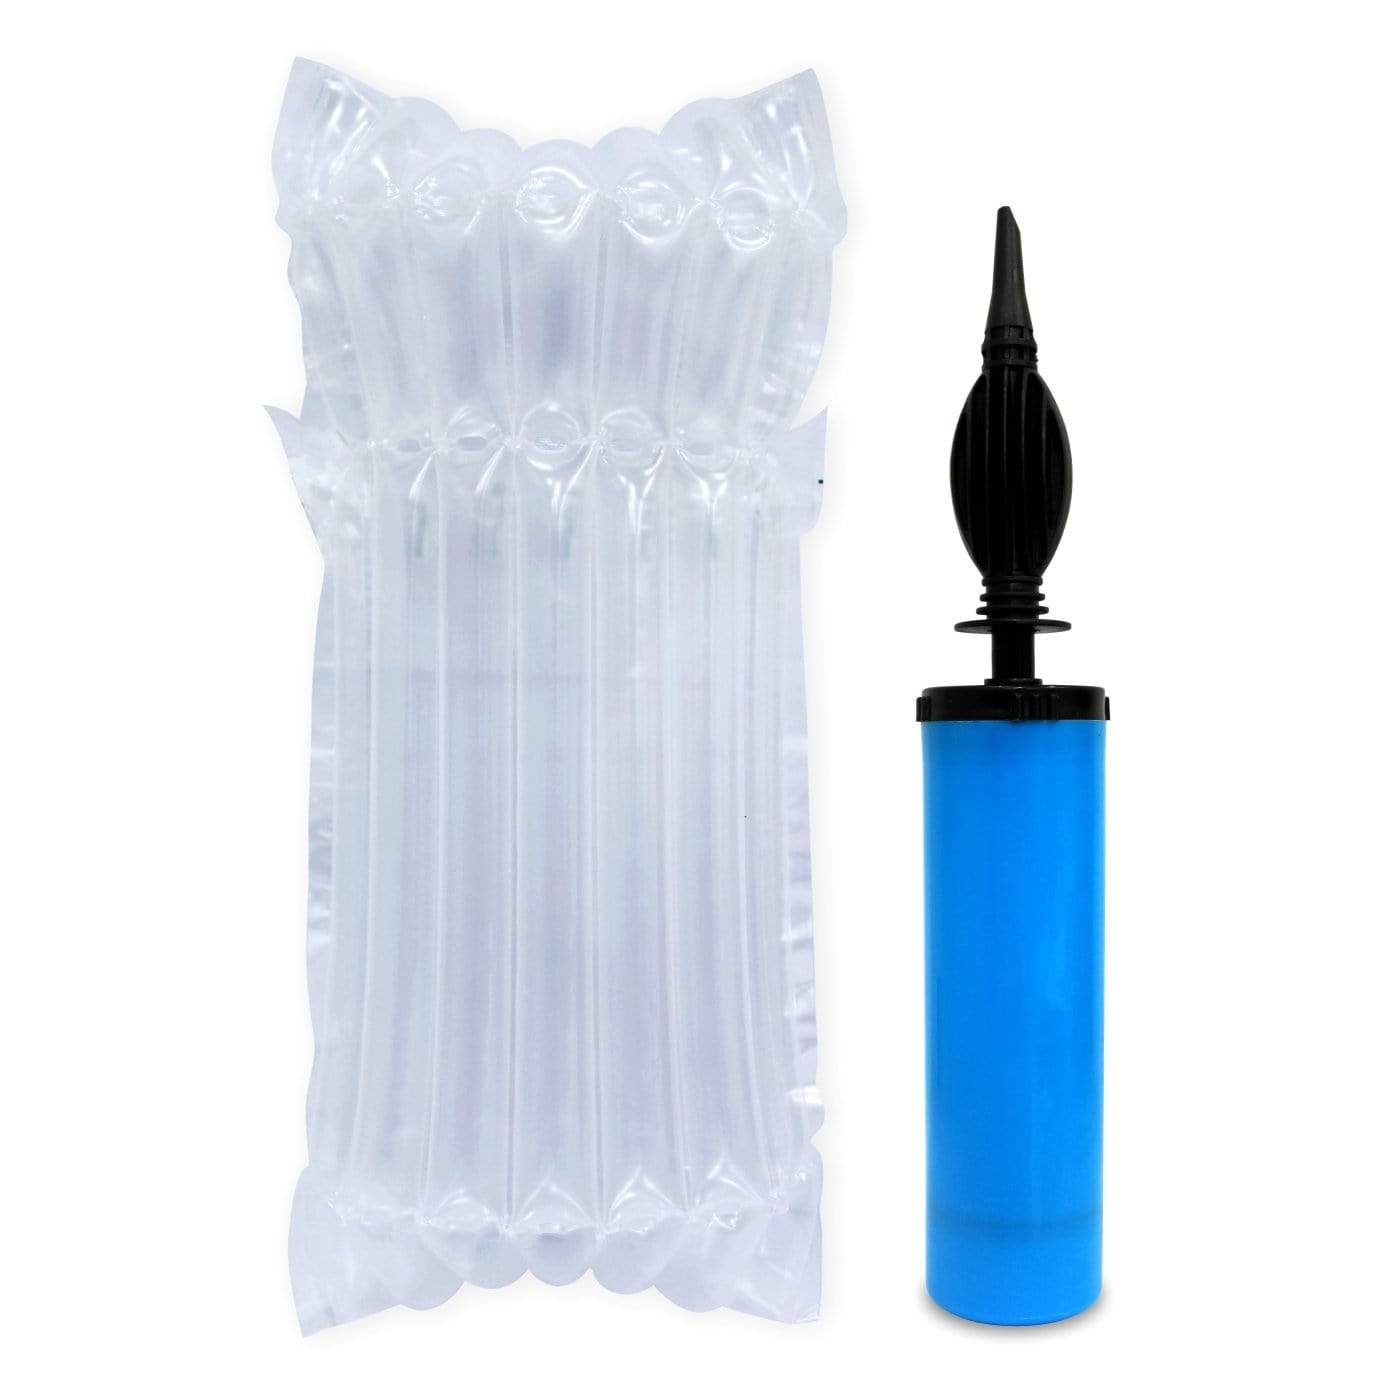 Wine Bottle Protector, Inflatable Bottle Protector